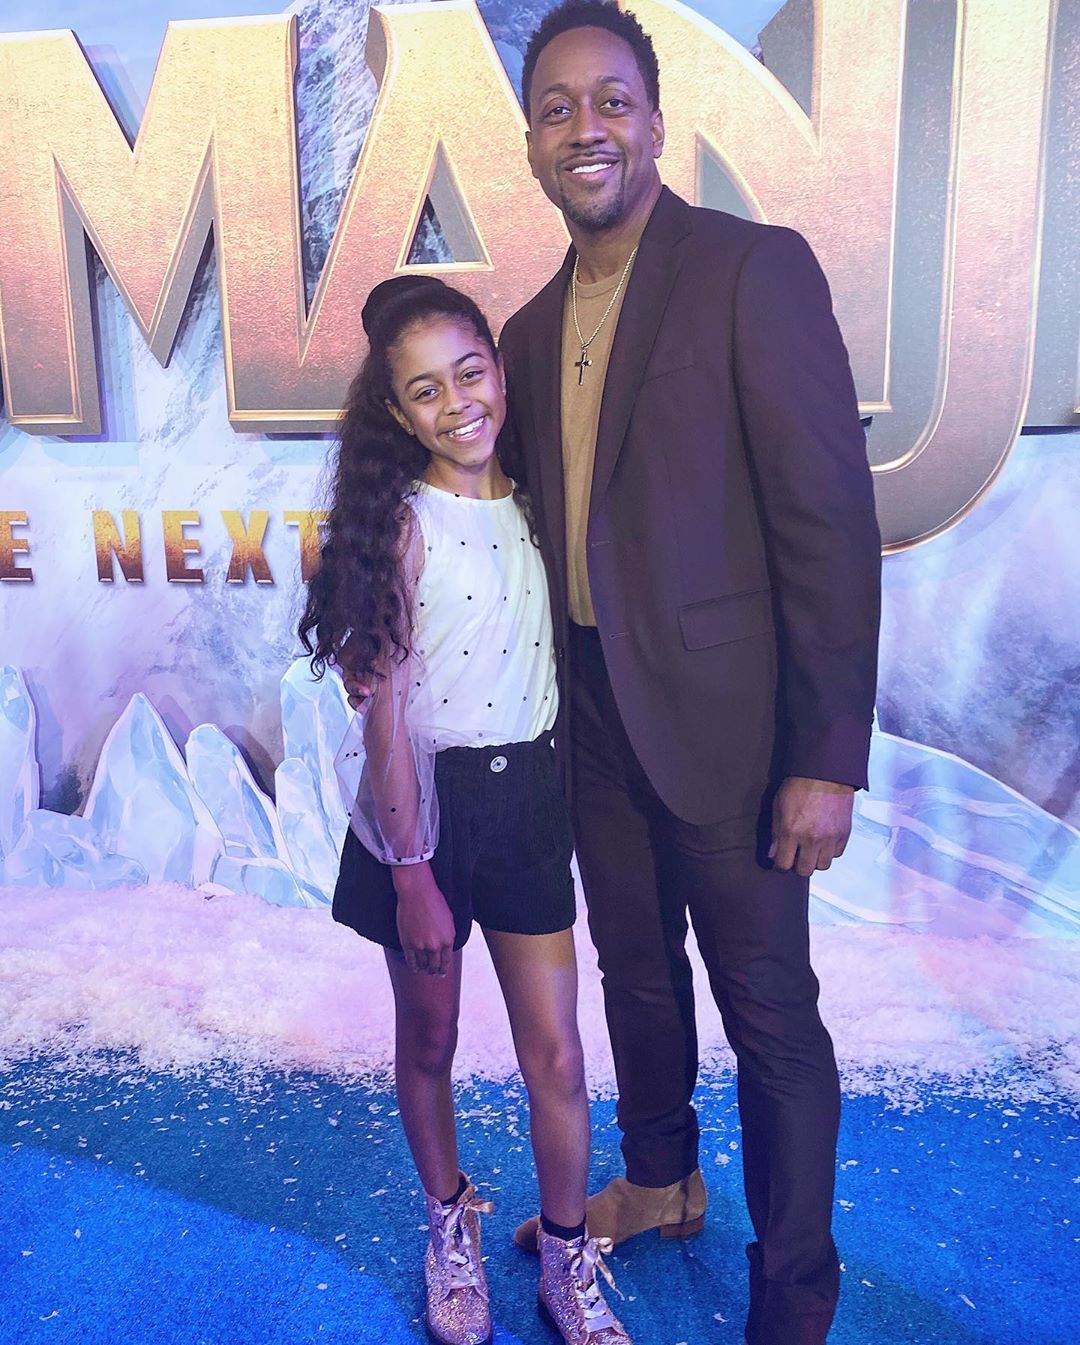 Jaleel White and his daughter Samaya attend the "Jumanji" movie premiere | Source: Getty Images/GlobalImagesUkraine